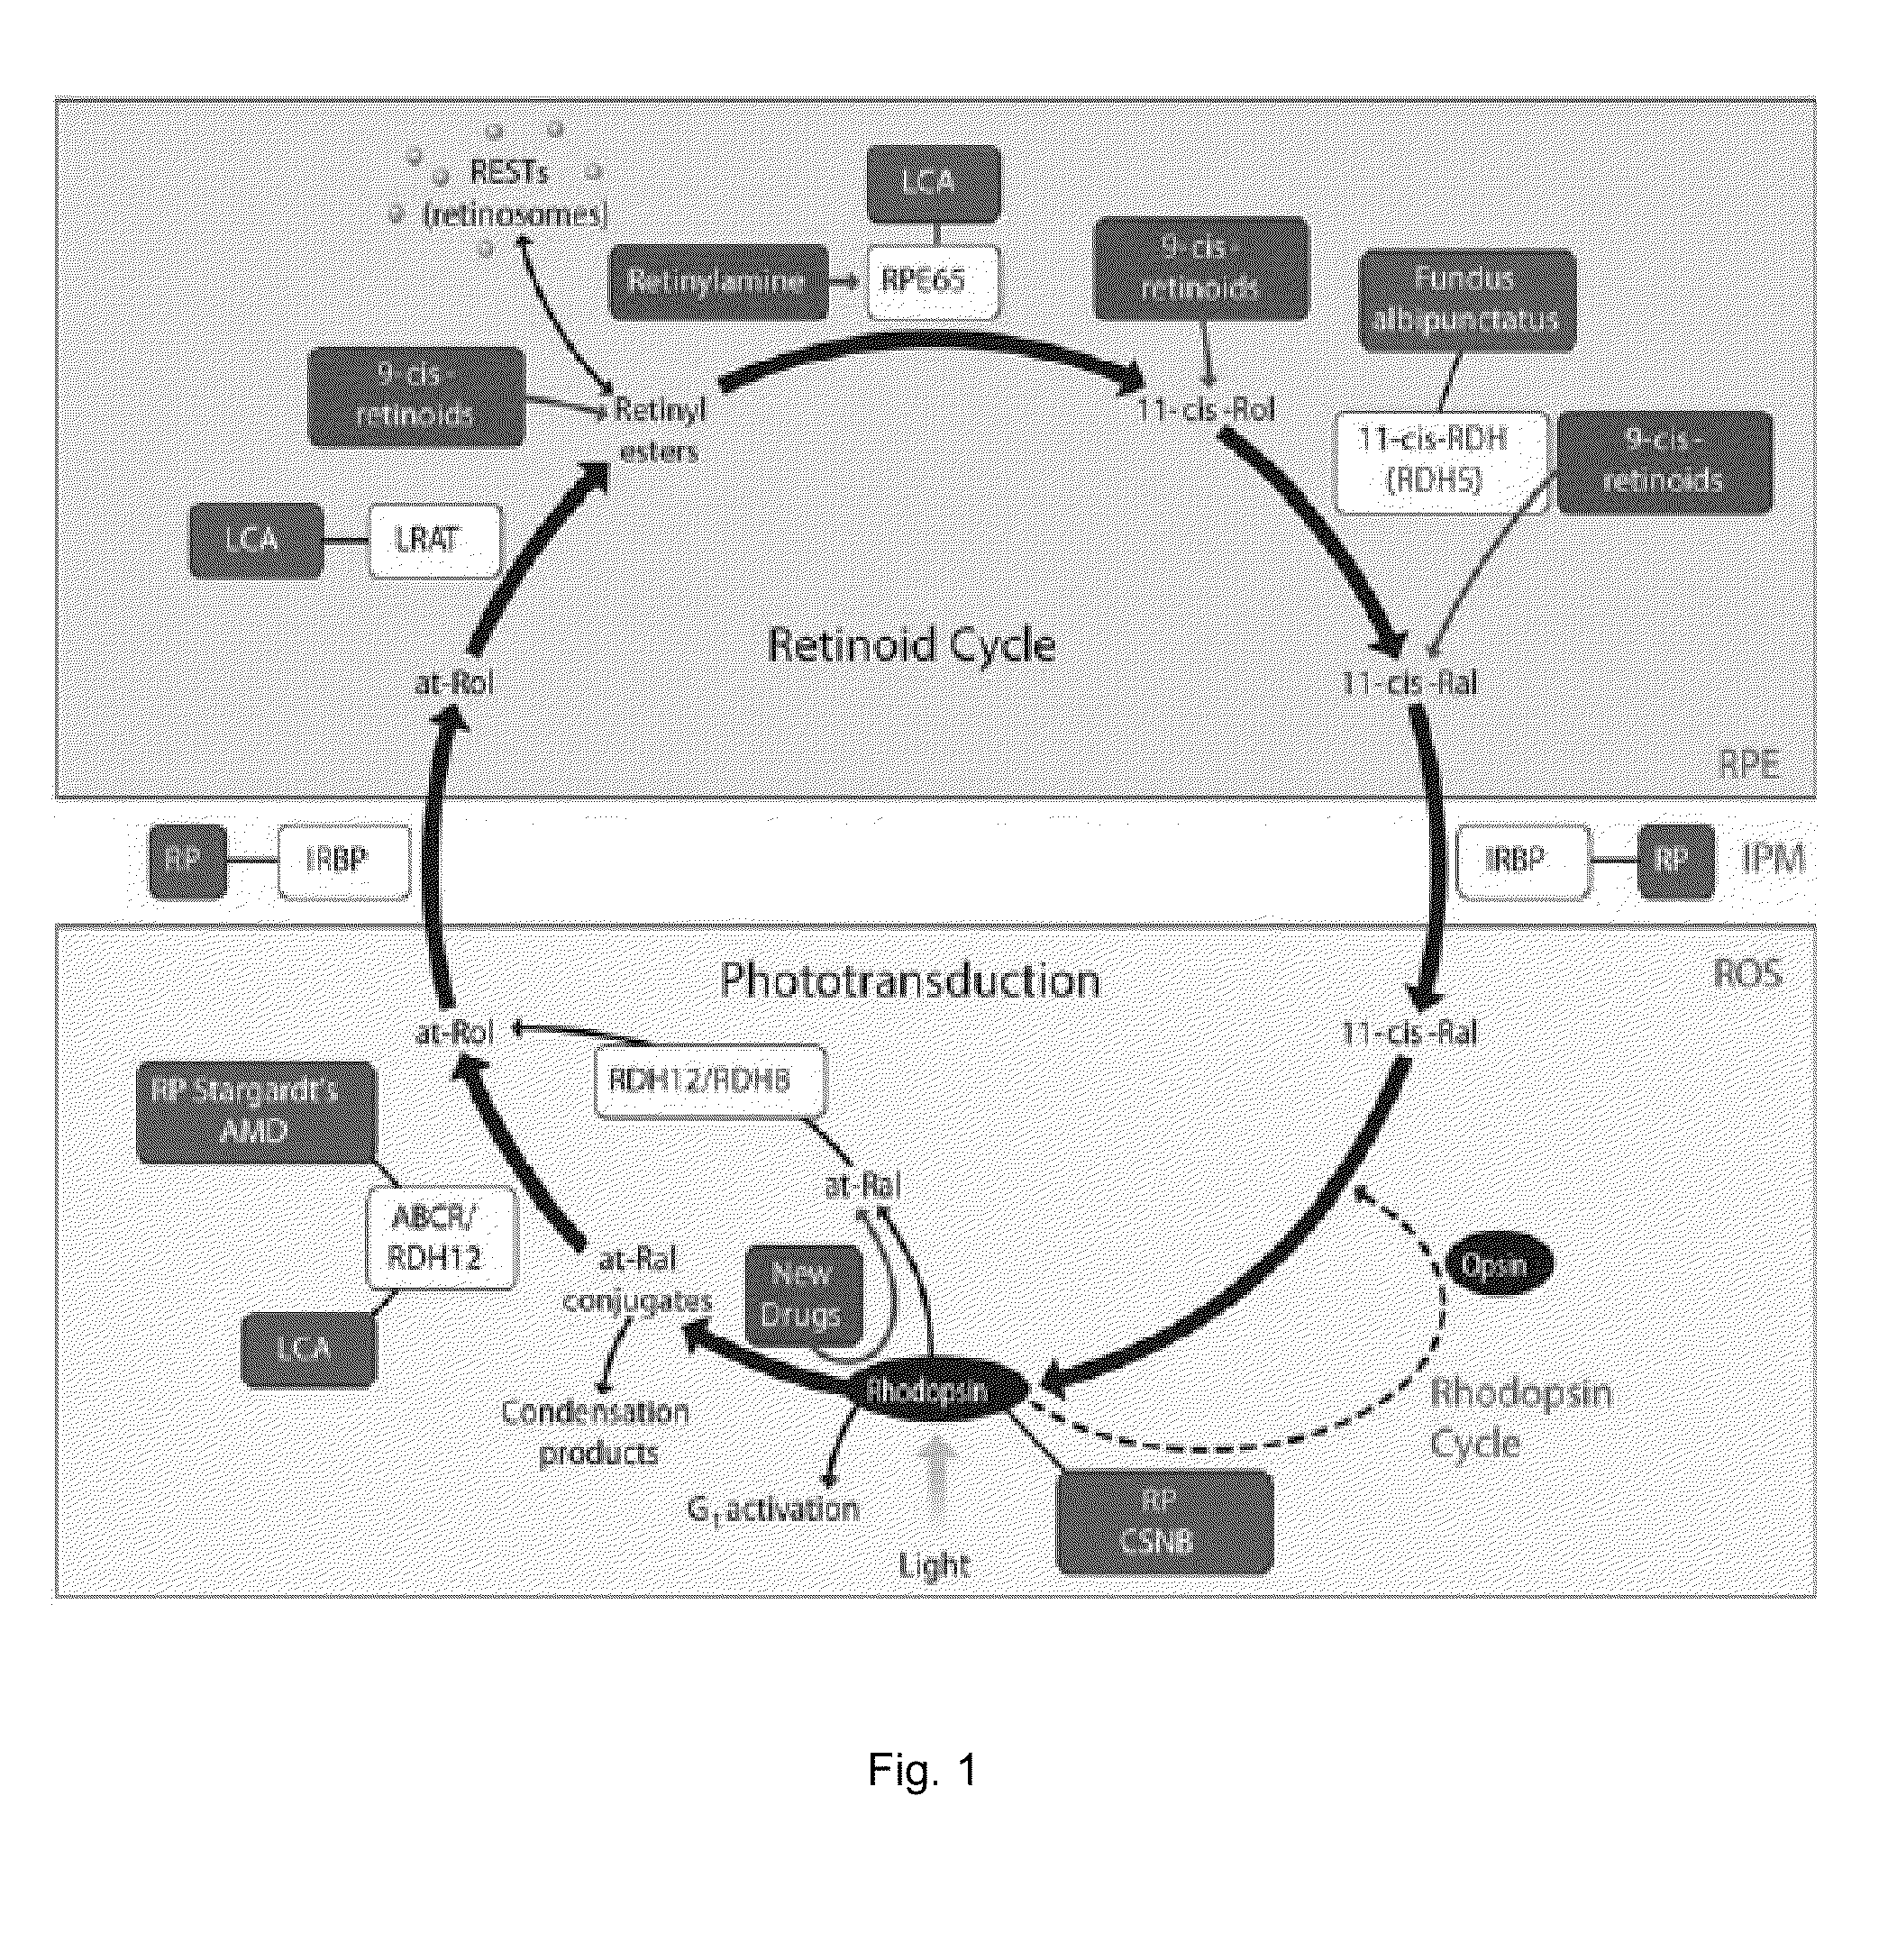 Compounds and methods of treating ocular disorders